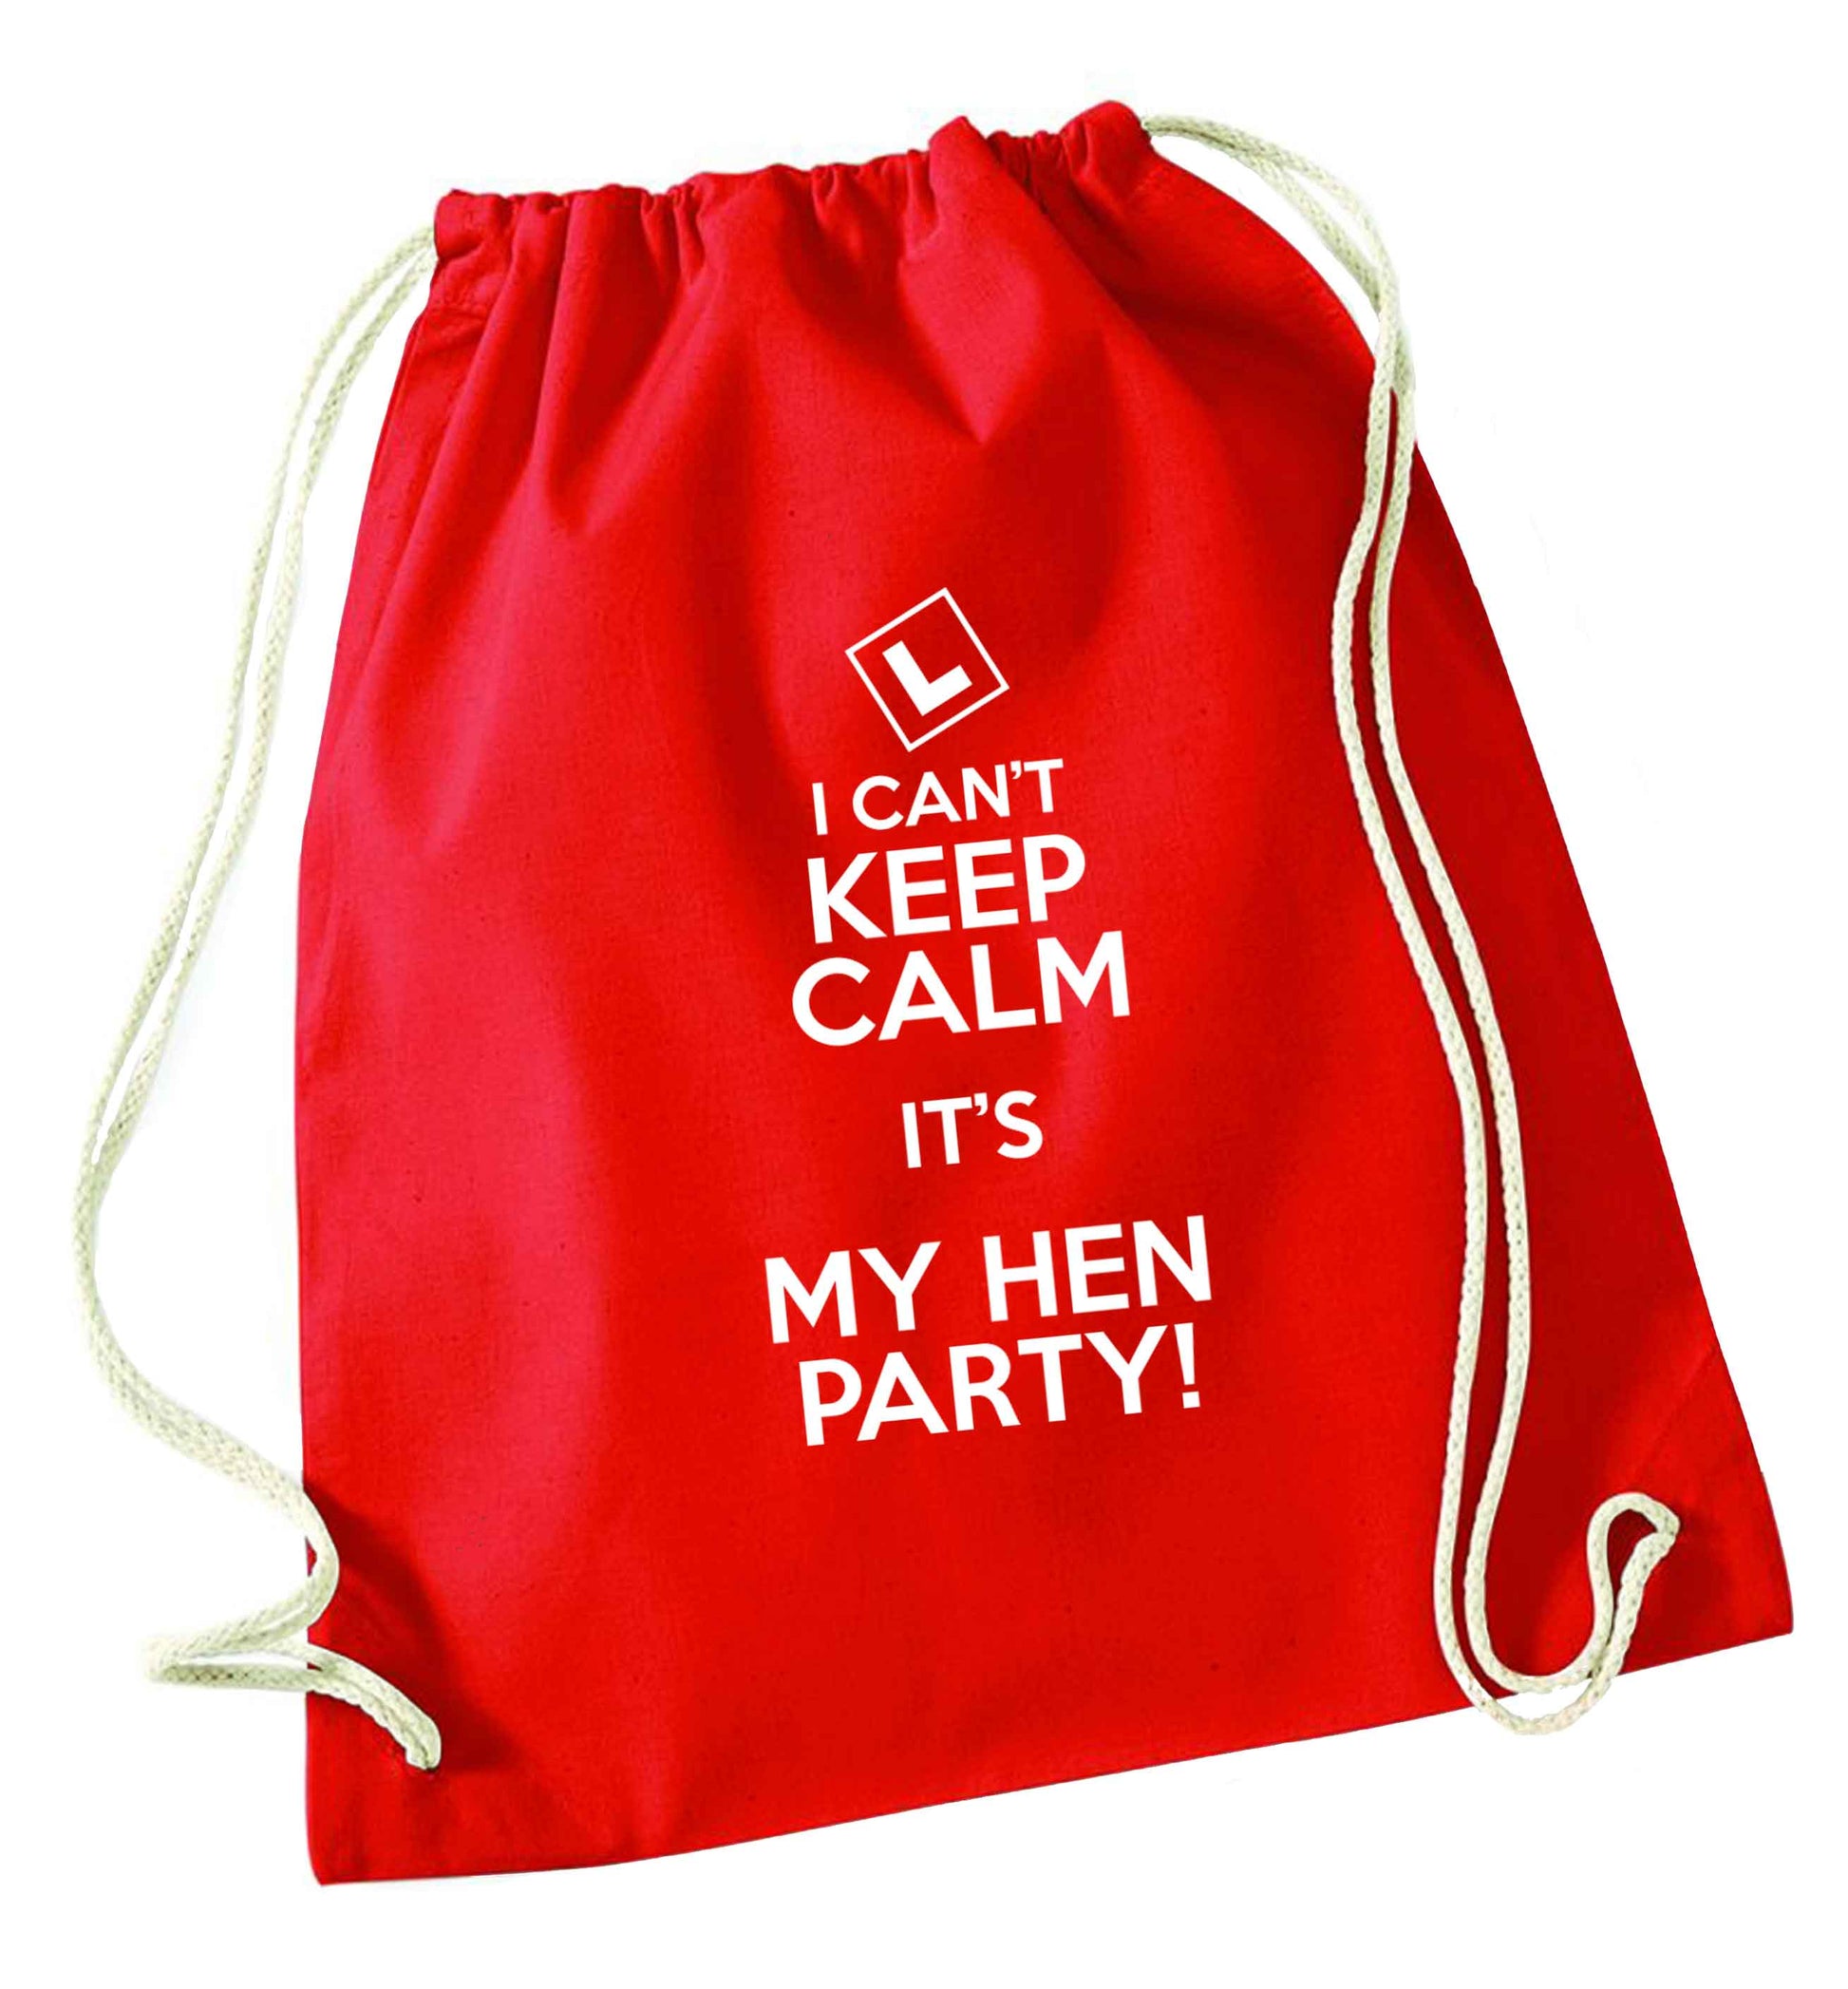 I can't keep calm it's my hen party red drawstring bag 